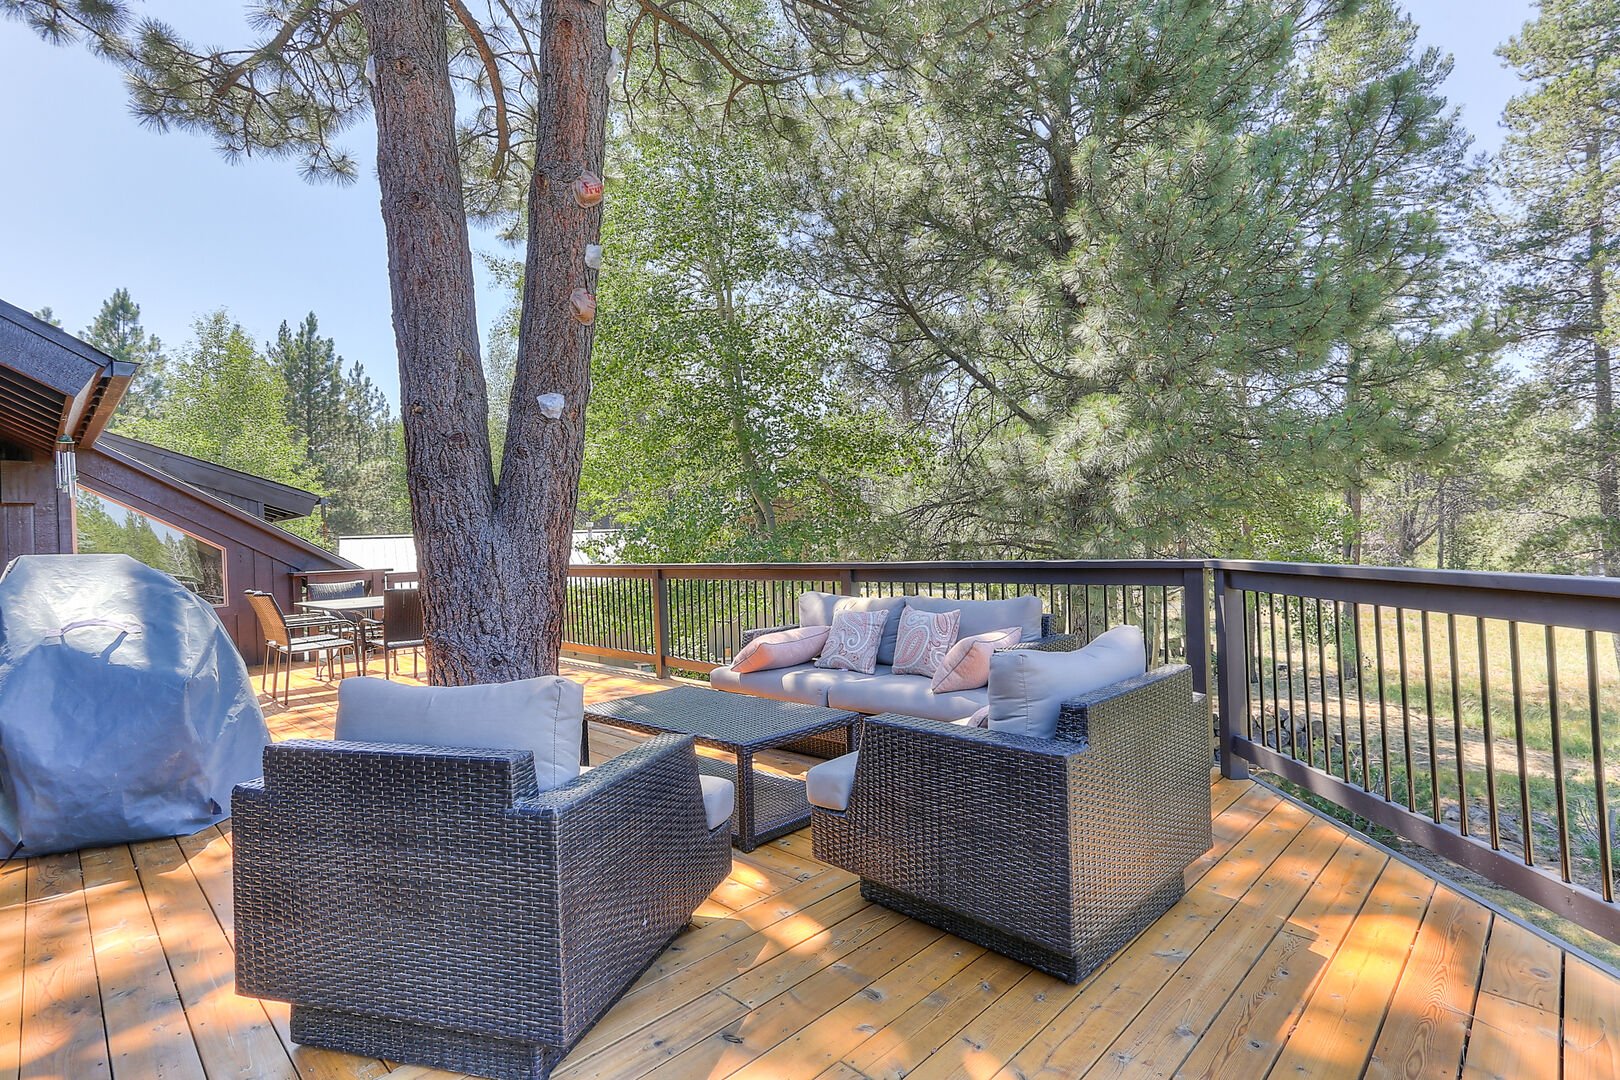 Deck with comfortable seating - golf course views